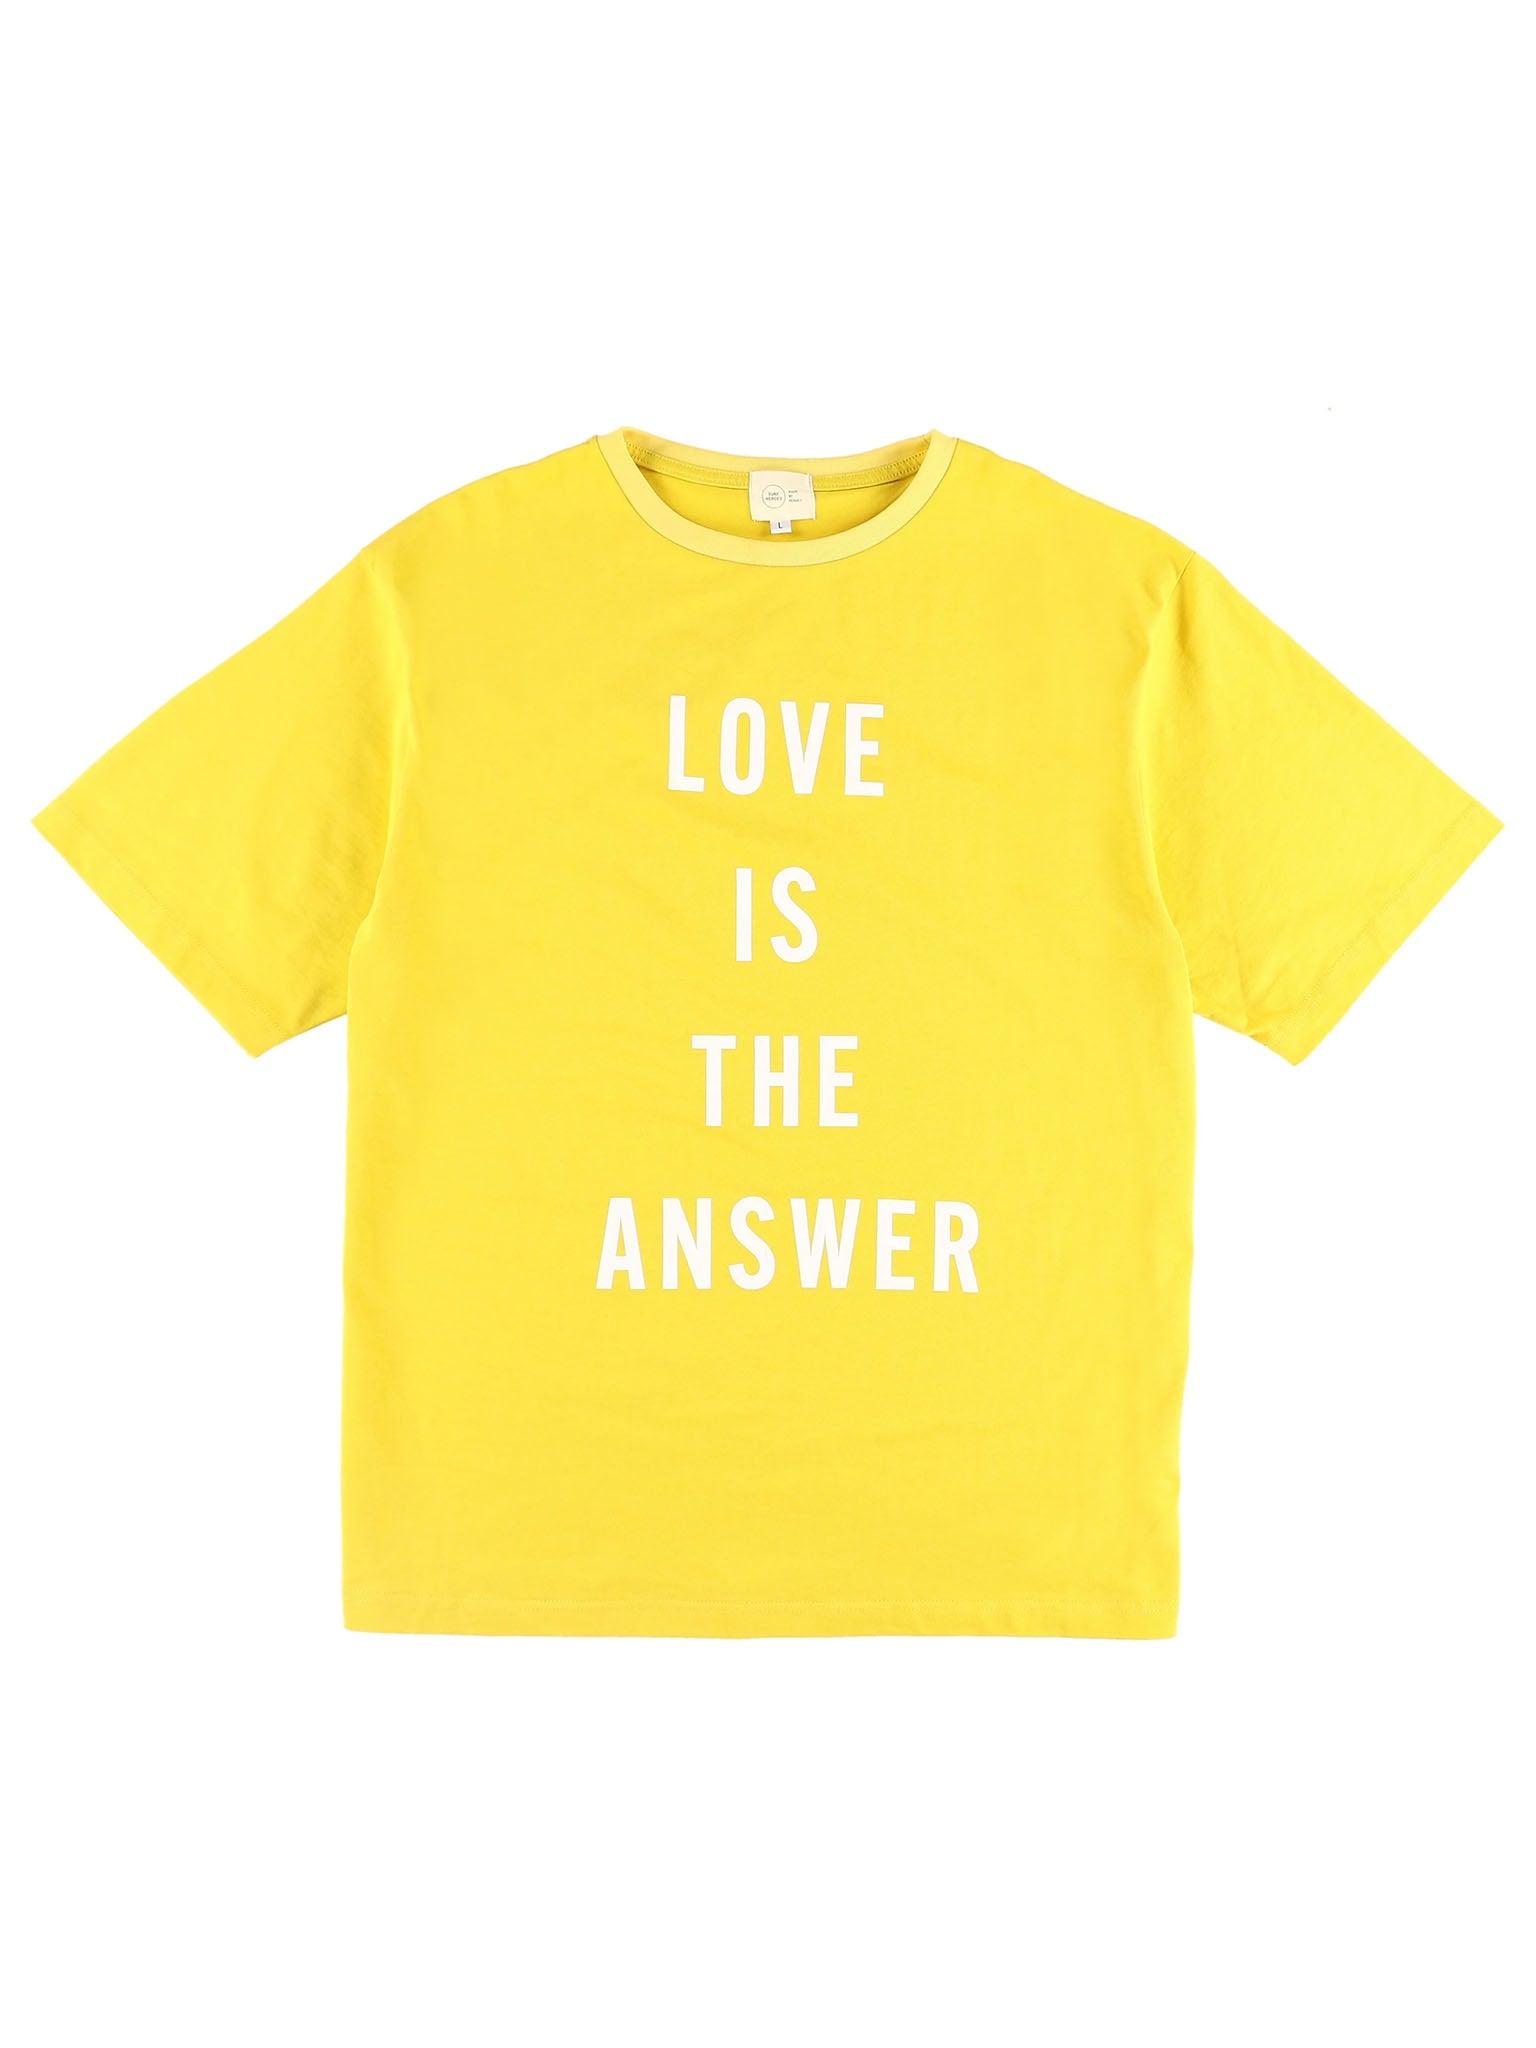 SH LOVE IS THE ANSWER TEE